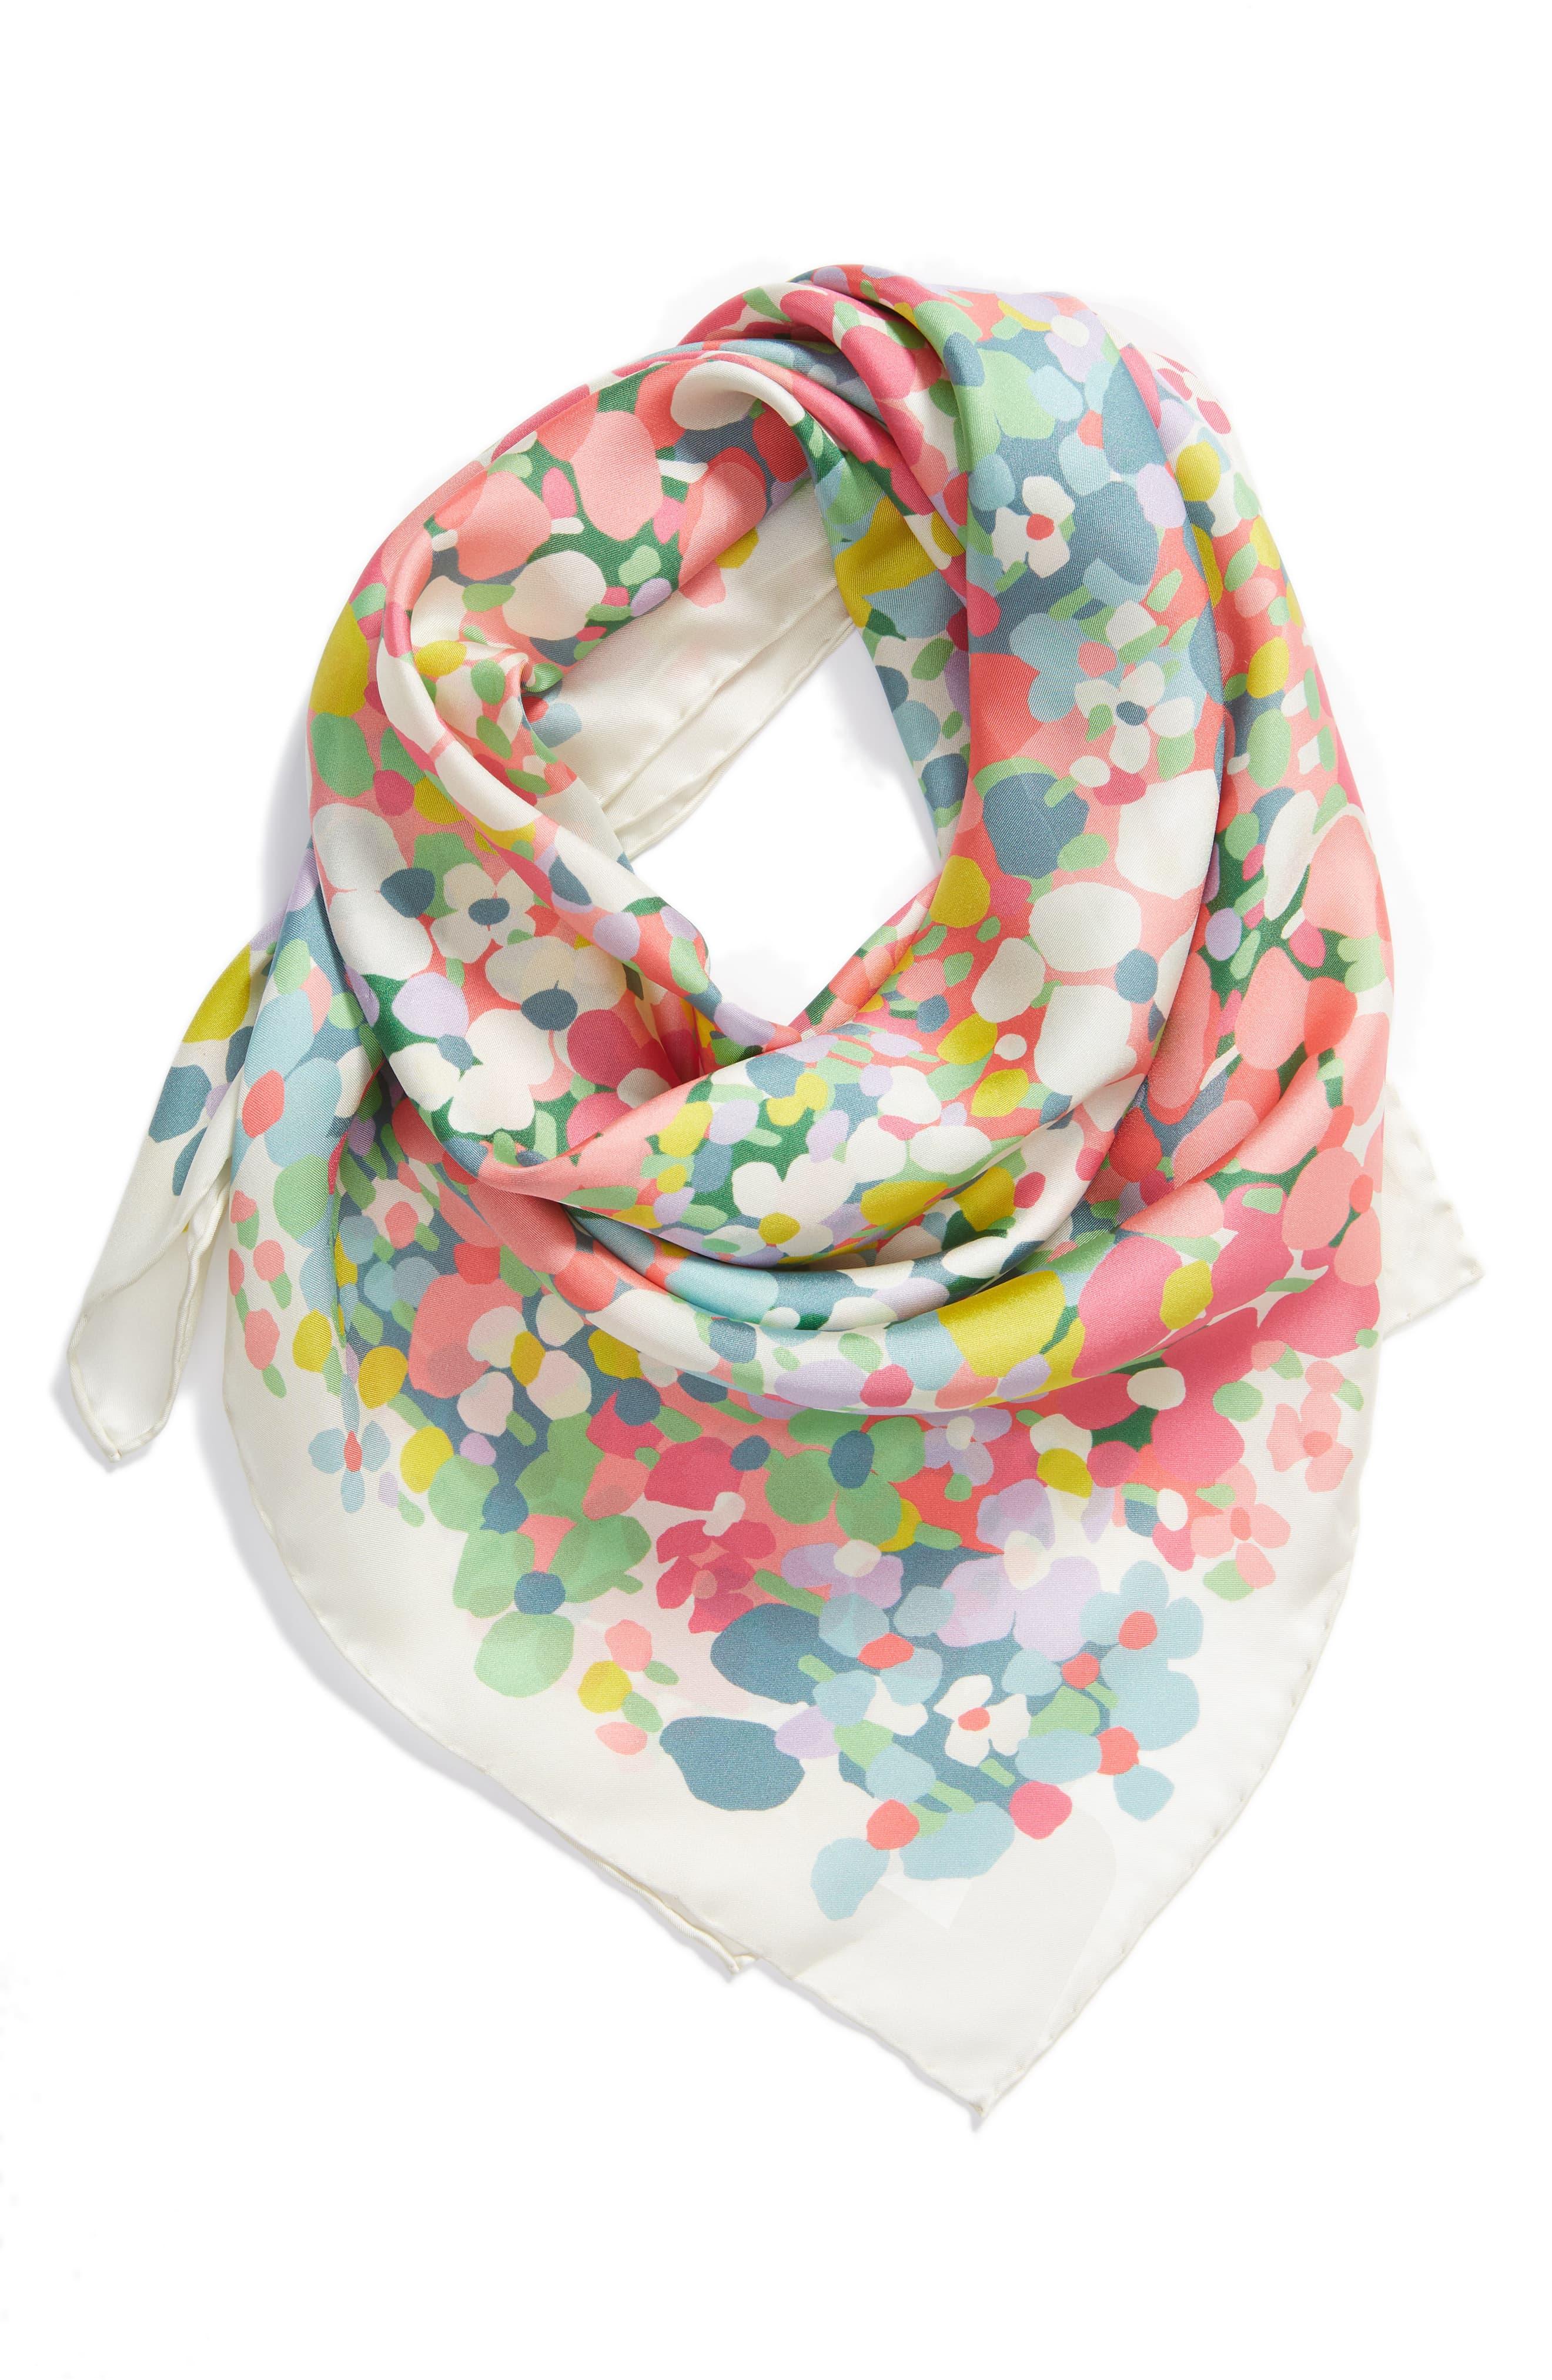 Kate Spade Floral Dots Square Silk Scarf in White - Lyst